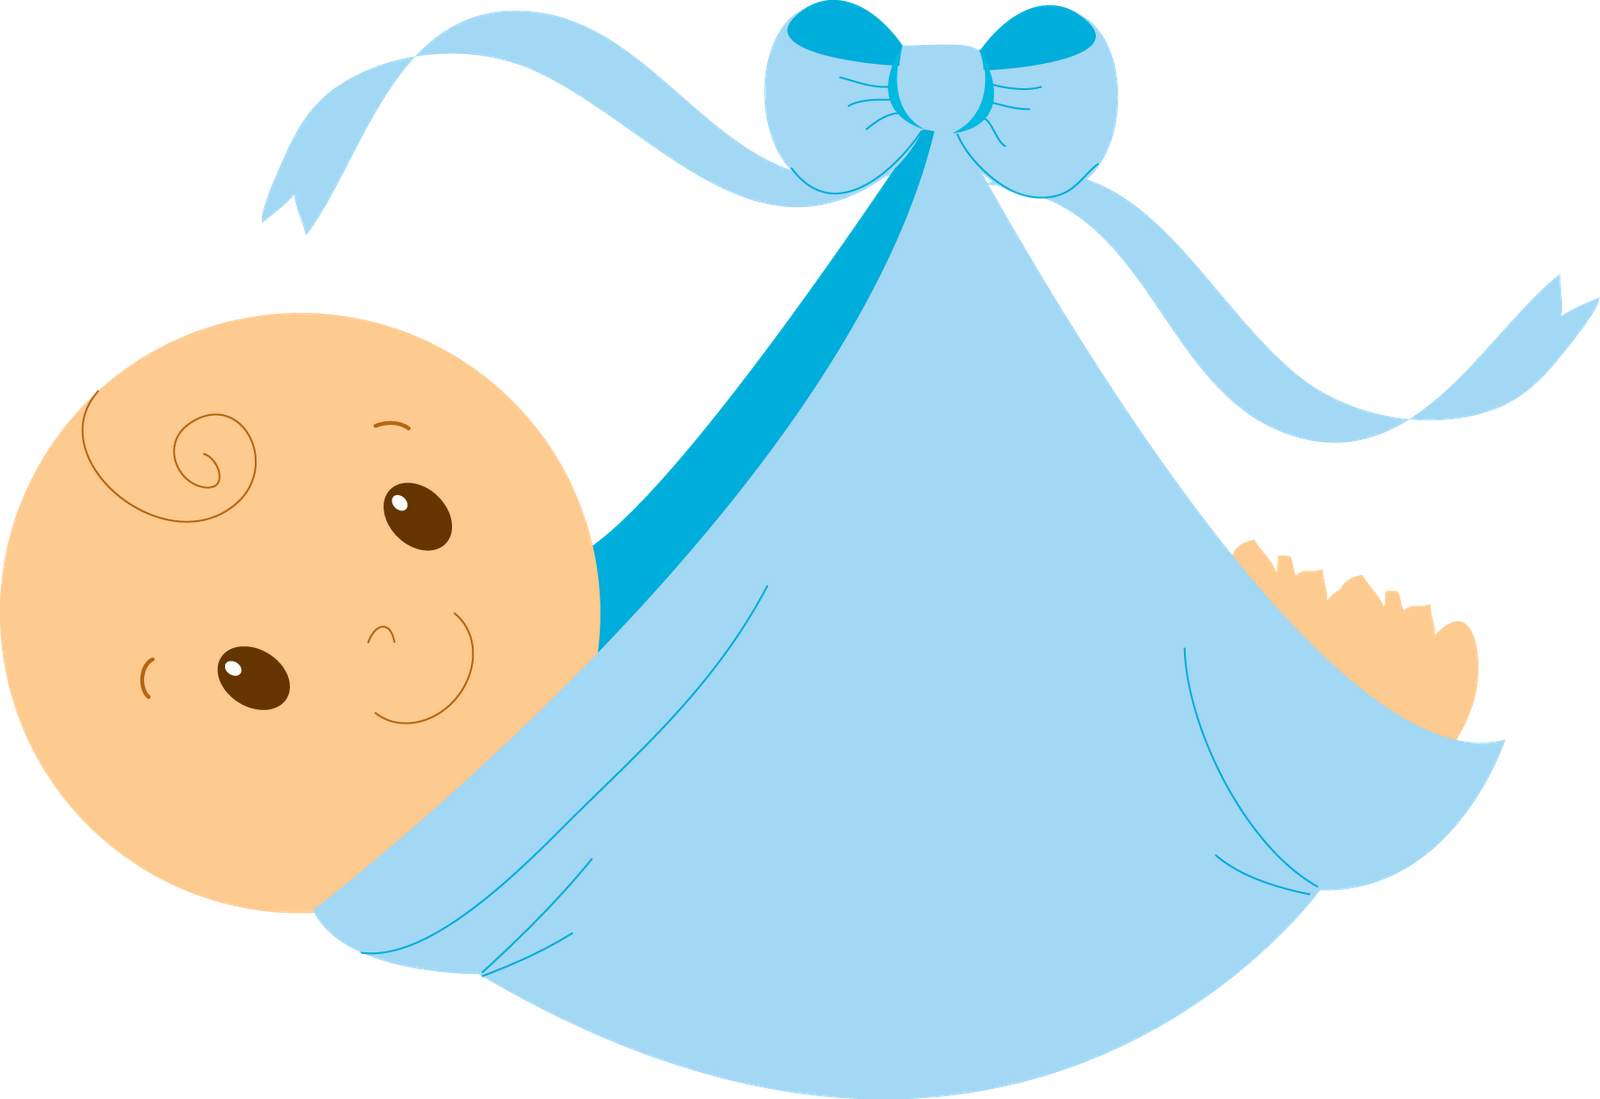 1000+ images about Baby Shower Images and Games